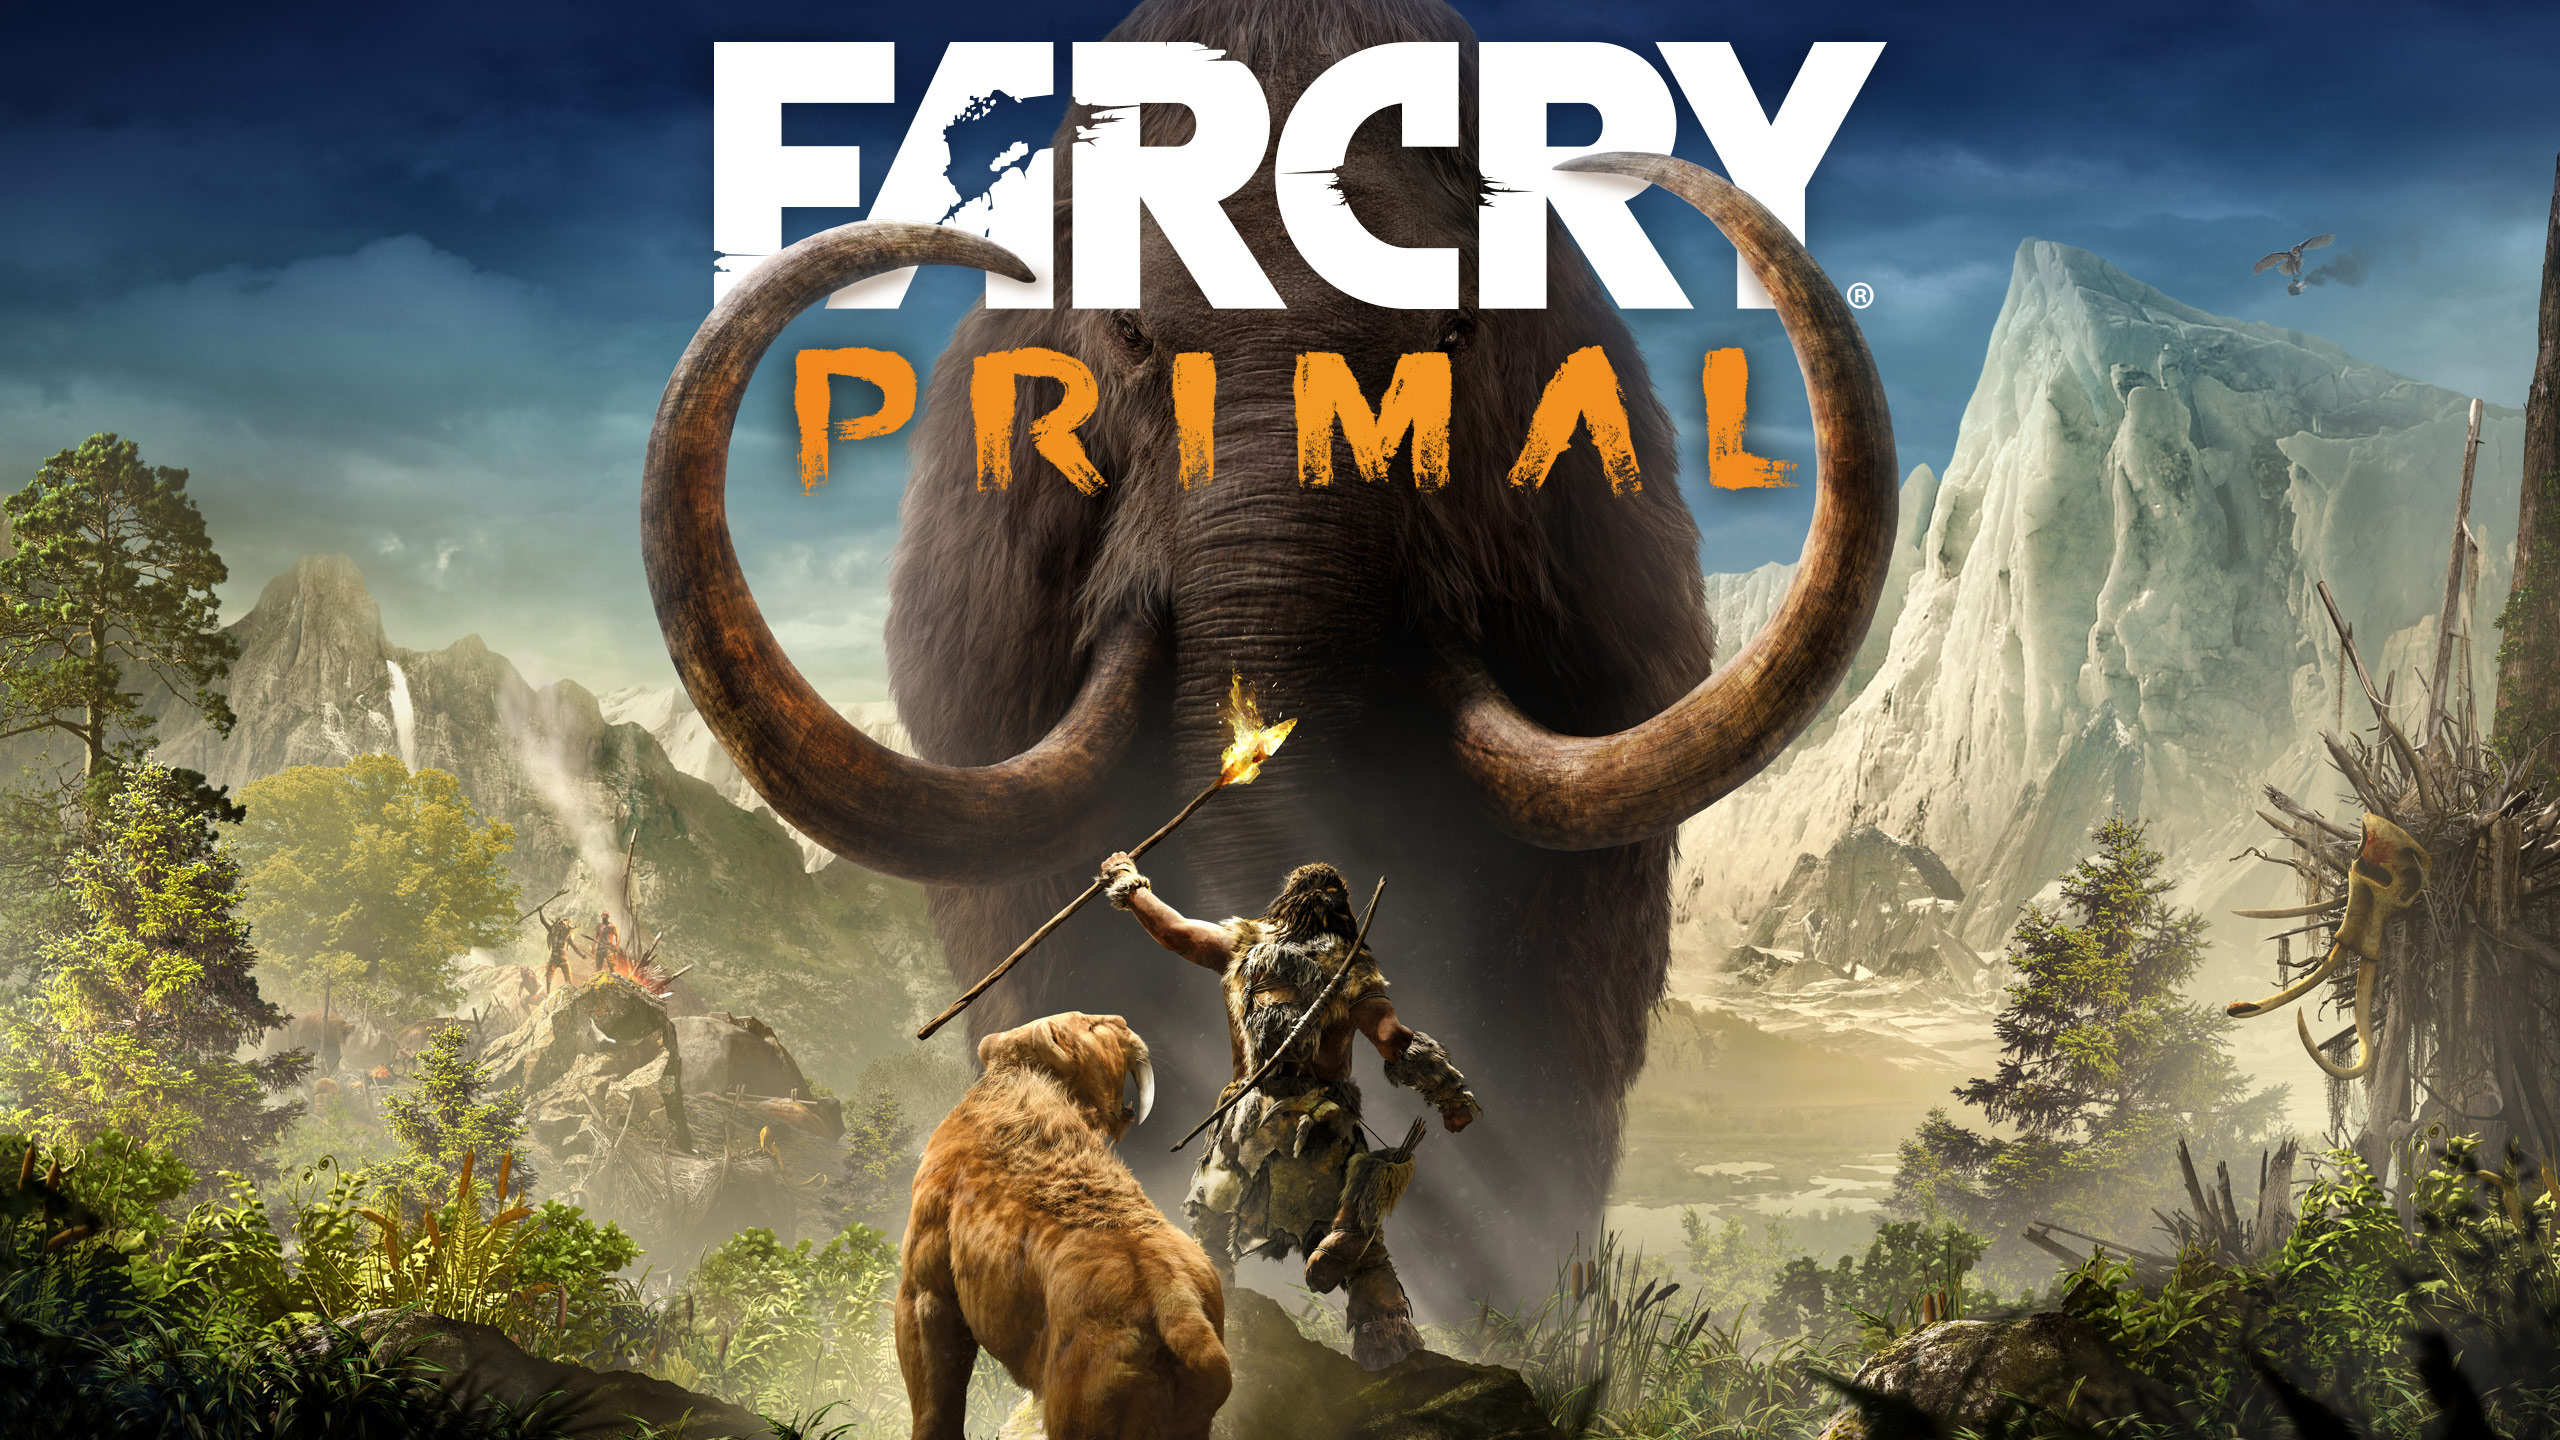 The Middle Ground: Far Cry 5 and Primal